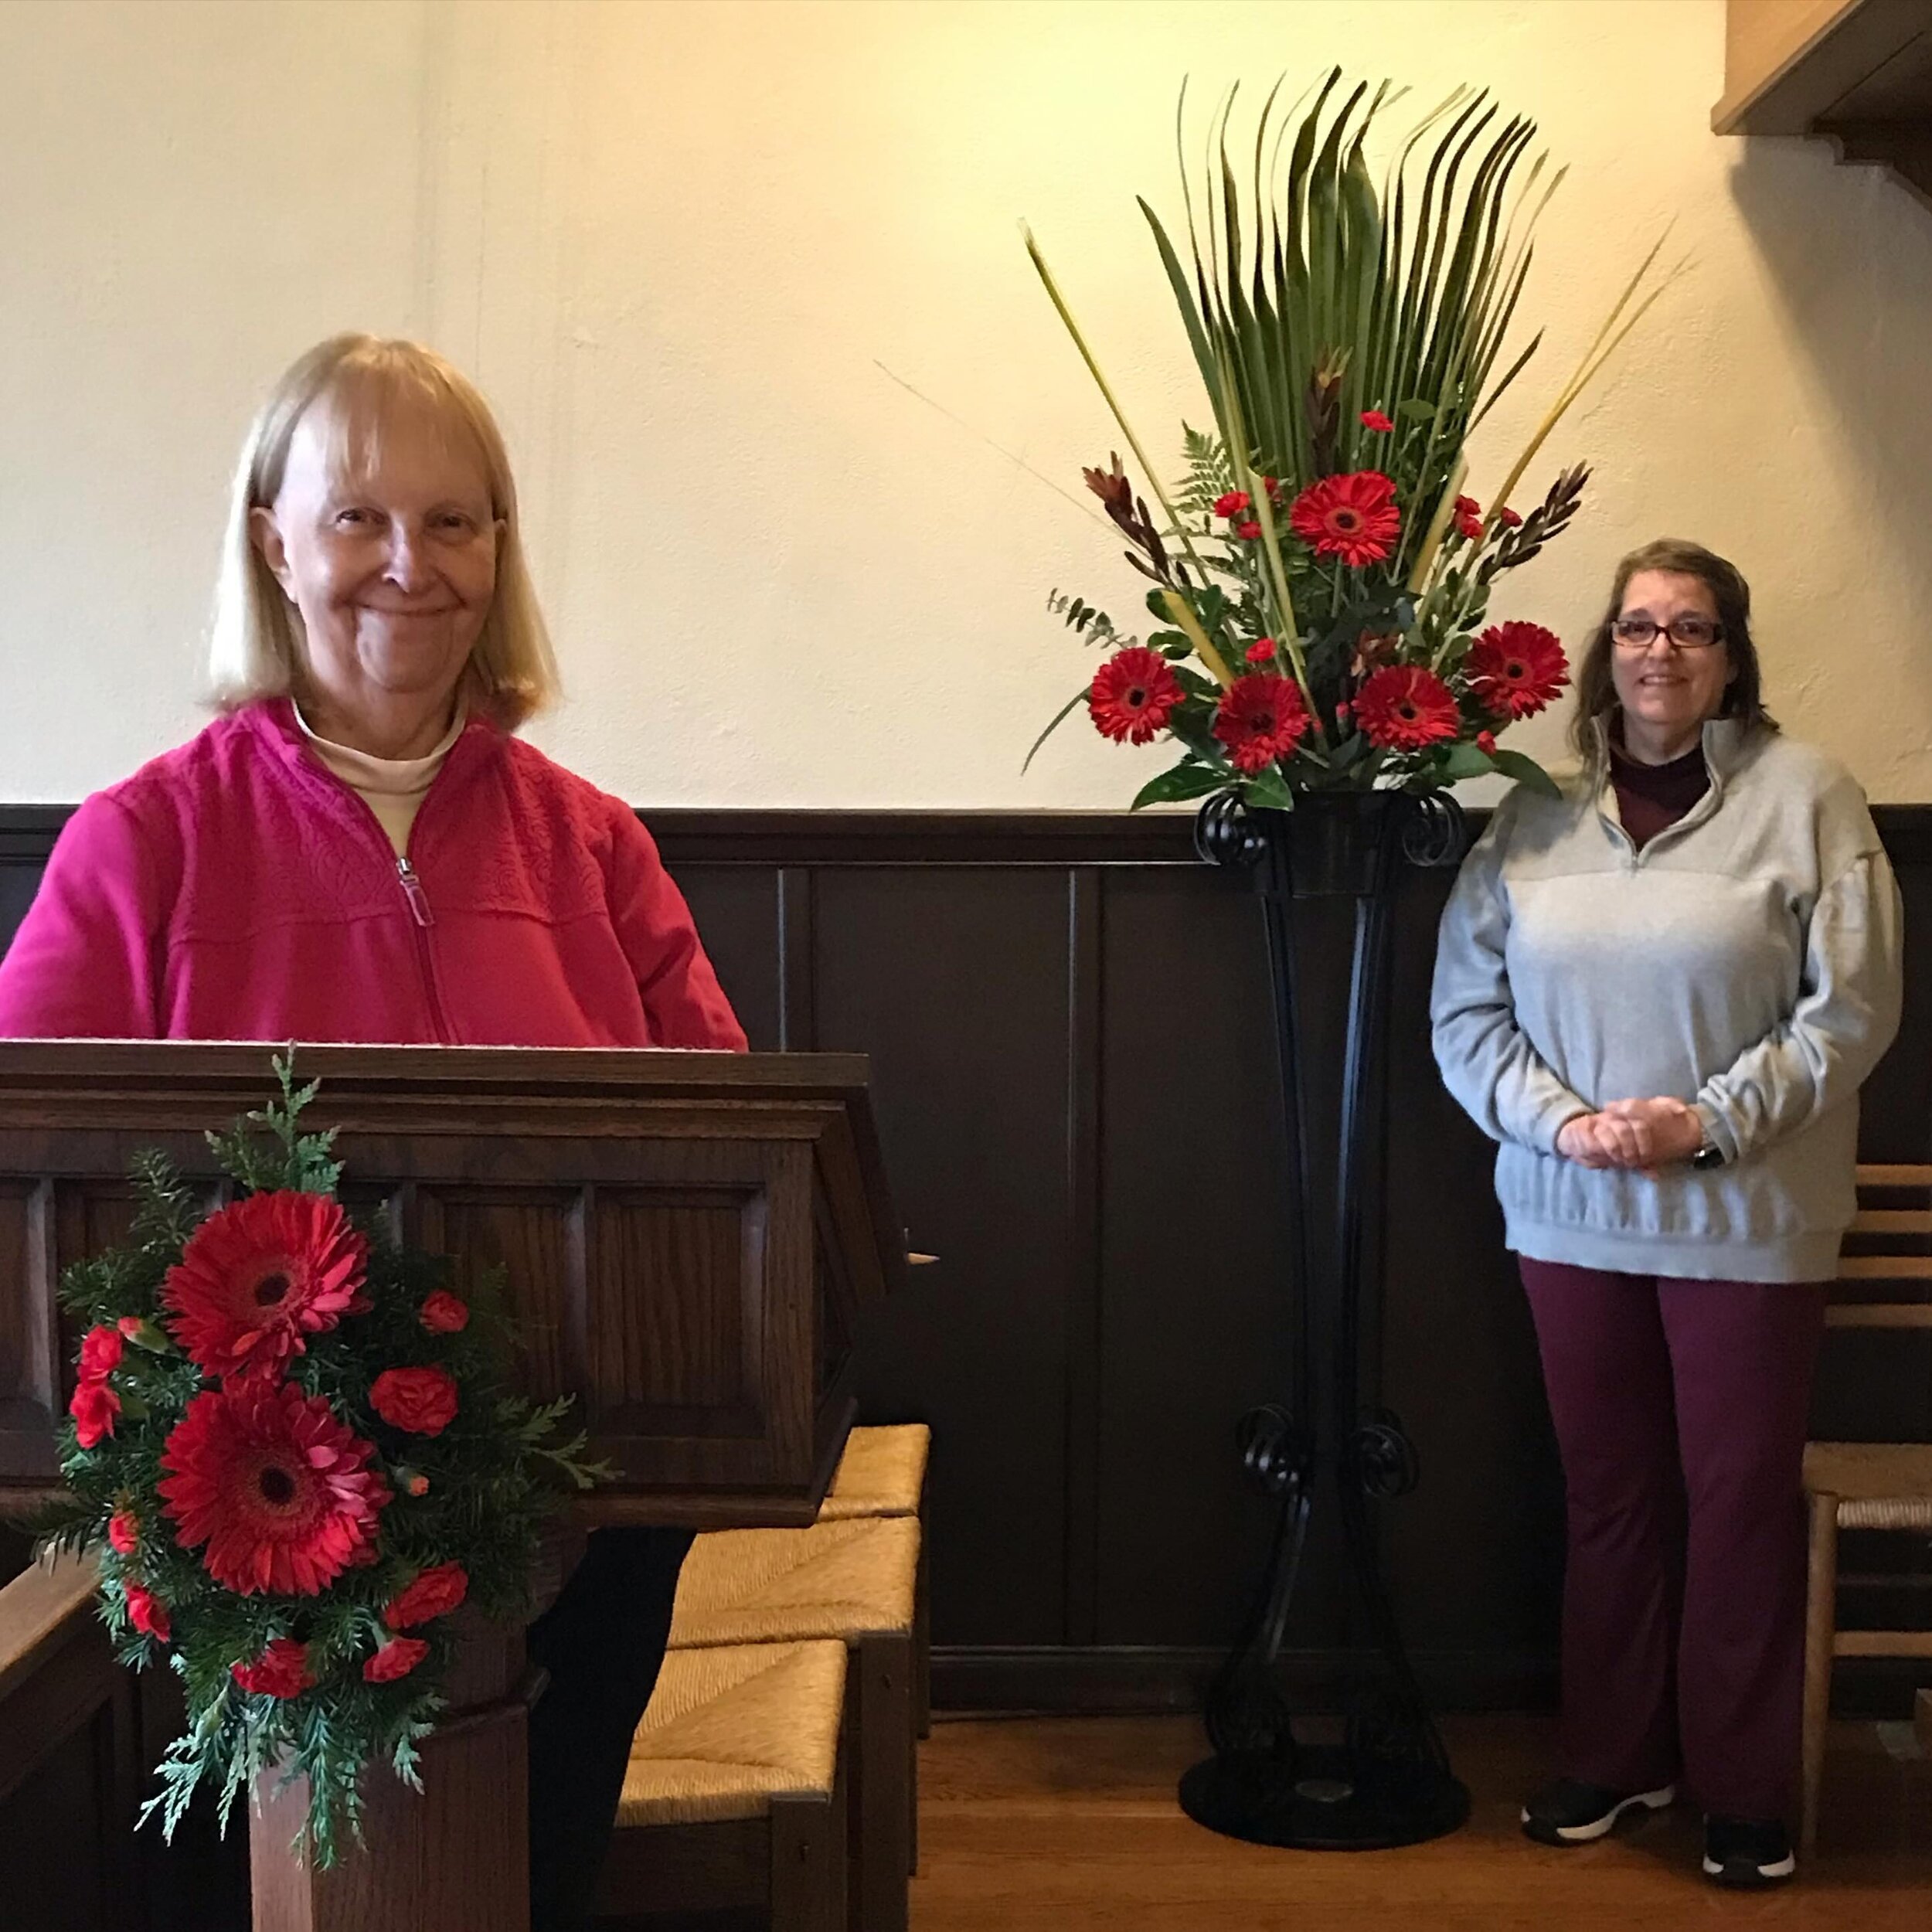 Nancy, Donna and Theresa (not shown) arranged flowers and palms, and we&rsquo;re ready for Holy Week to begin tomorrow. Join us at 9:30am for Palm Sunday; we&rsquo;ll begin in the Parish Hall and process with our palms into the sanctuary. #adventmedf